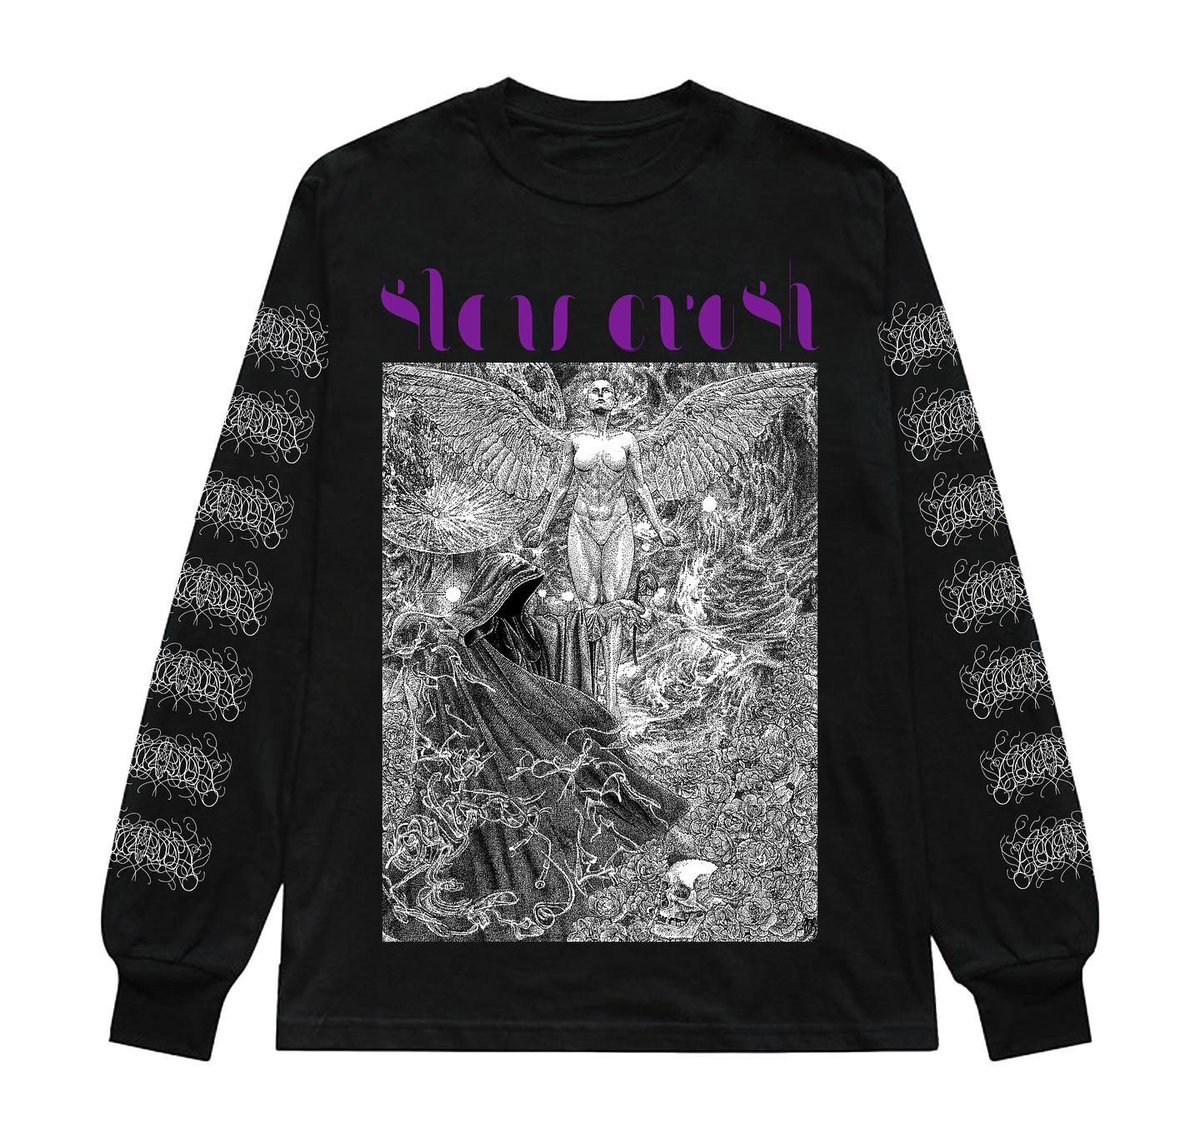 New merch drop! Available via our bigcartel or bandcamp. slowcrush.bigcartel.com